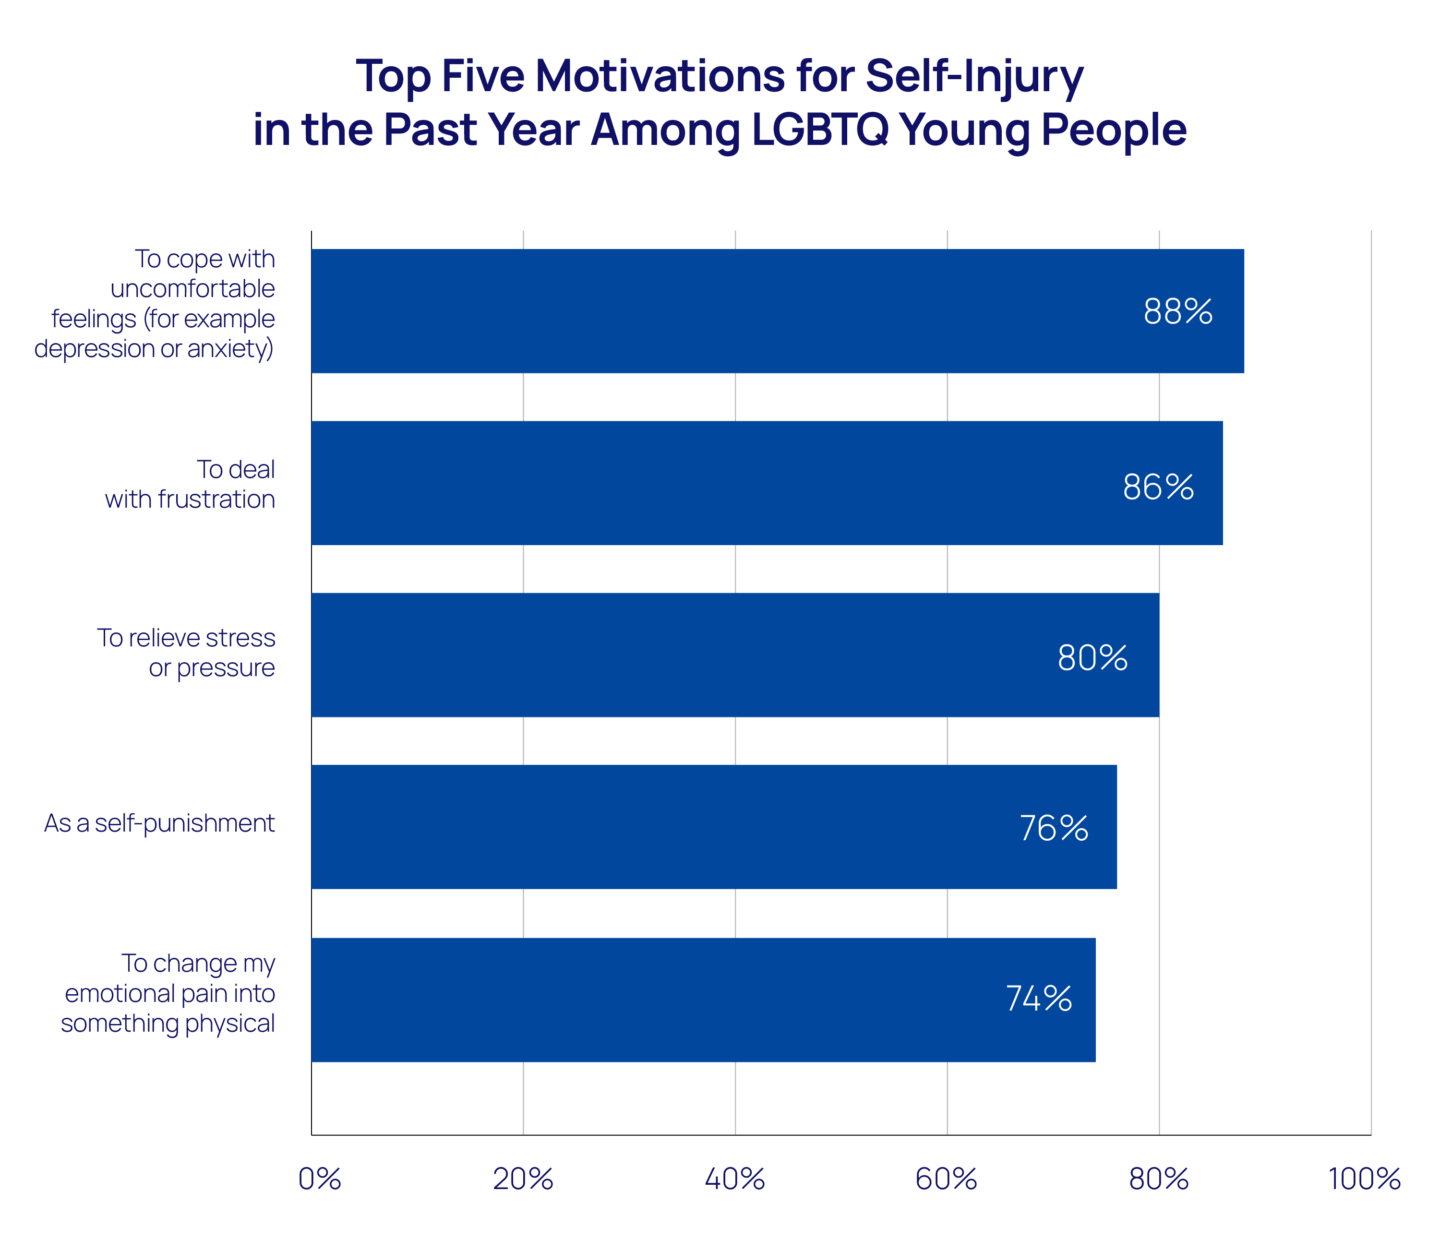 A bar graph showing the top five motivations for self-injury in the past year among LGBTQ young people: to cope with uncomfortable feelings (for example depression or anxiety) at 88%, to deal with frustration at 86%, to relieve stress or pressure at 80%, as a self-punishment at 76%, and to change my emotional pain into something physical at 74%.